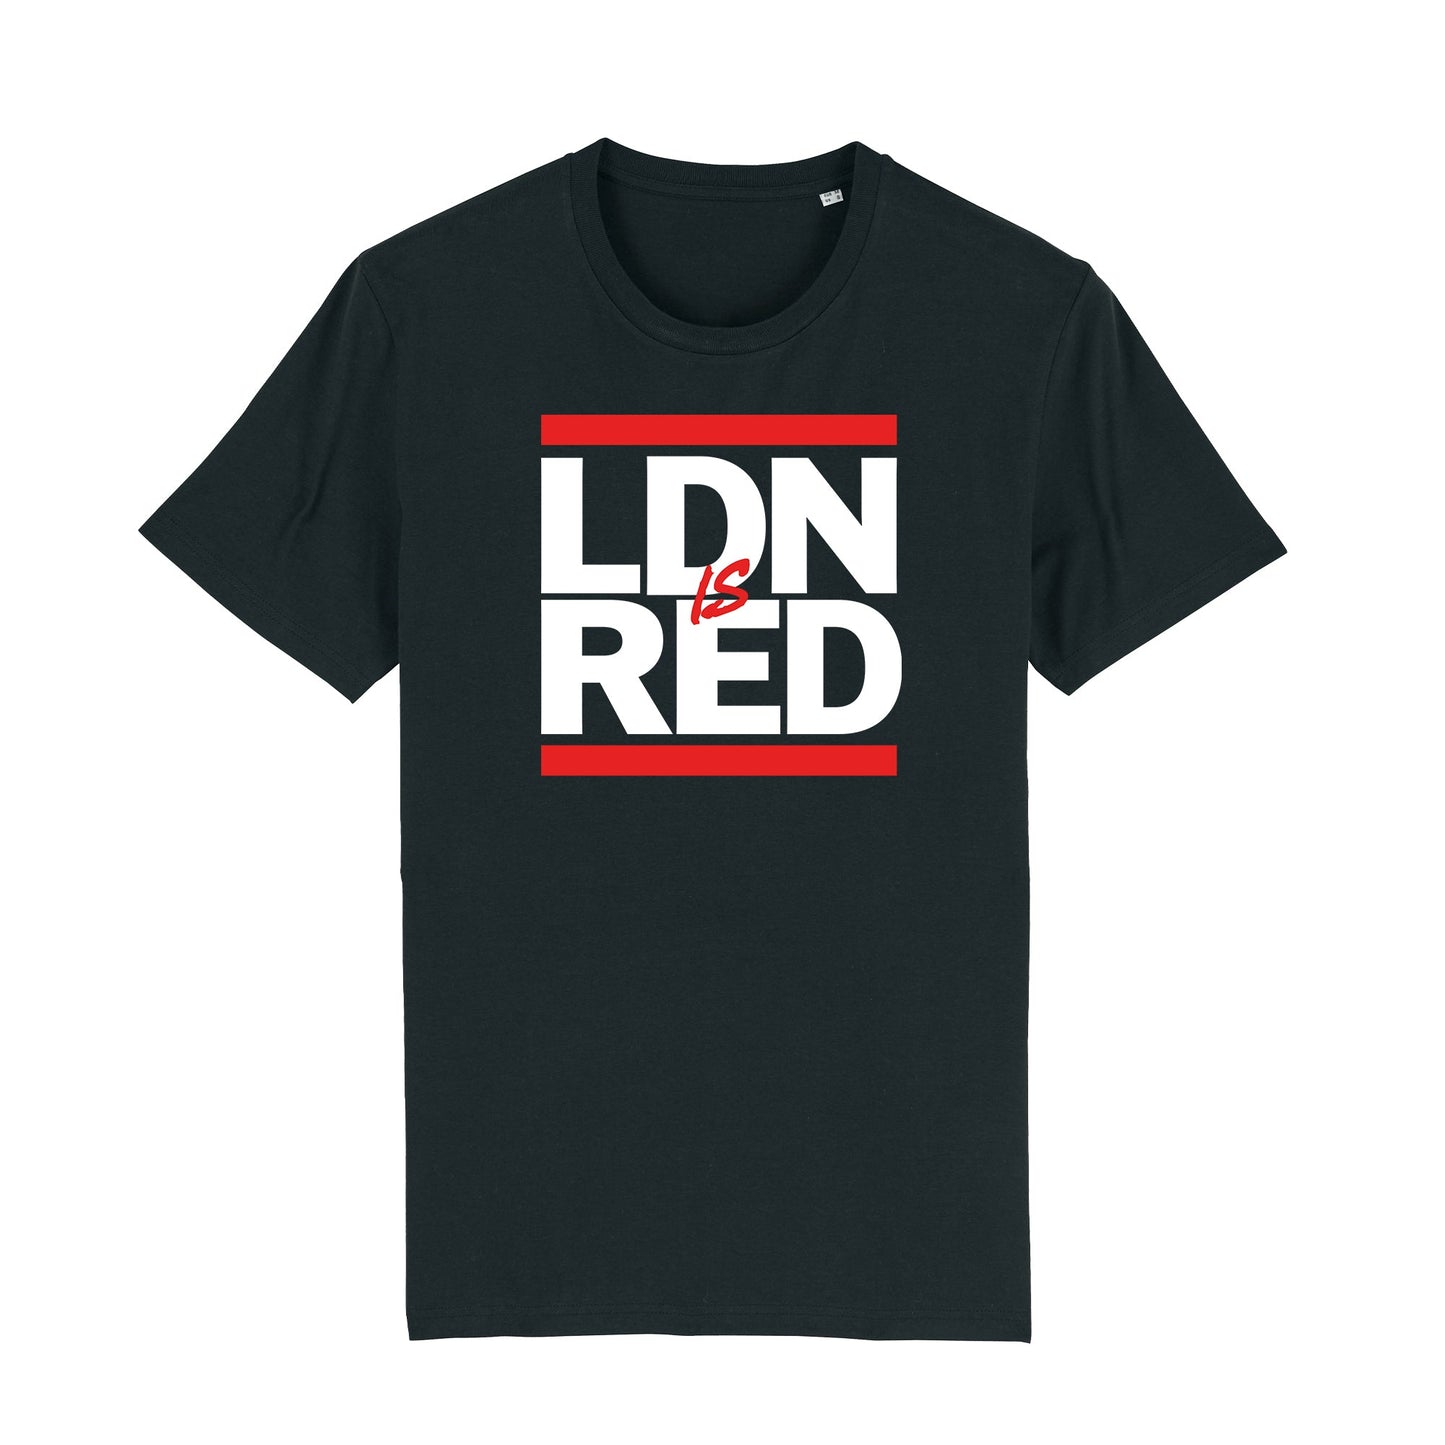 London Is Red Tee